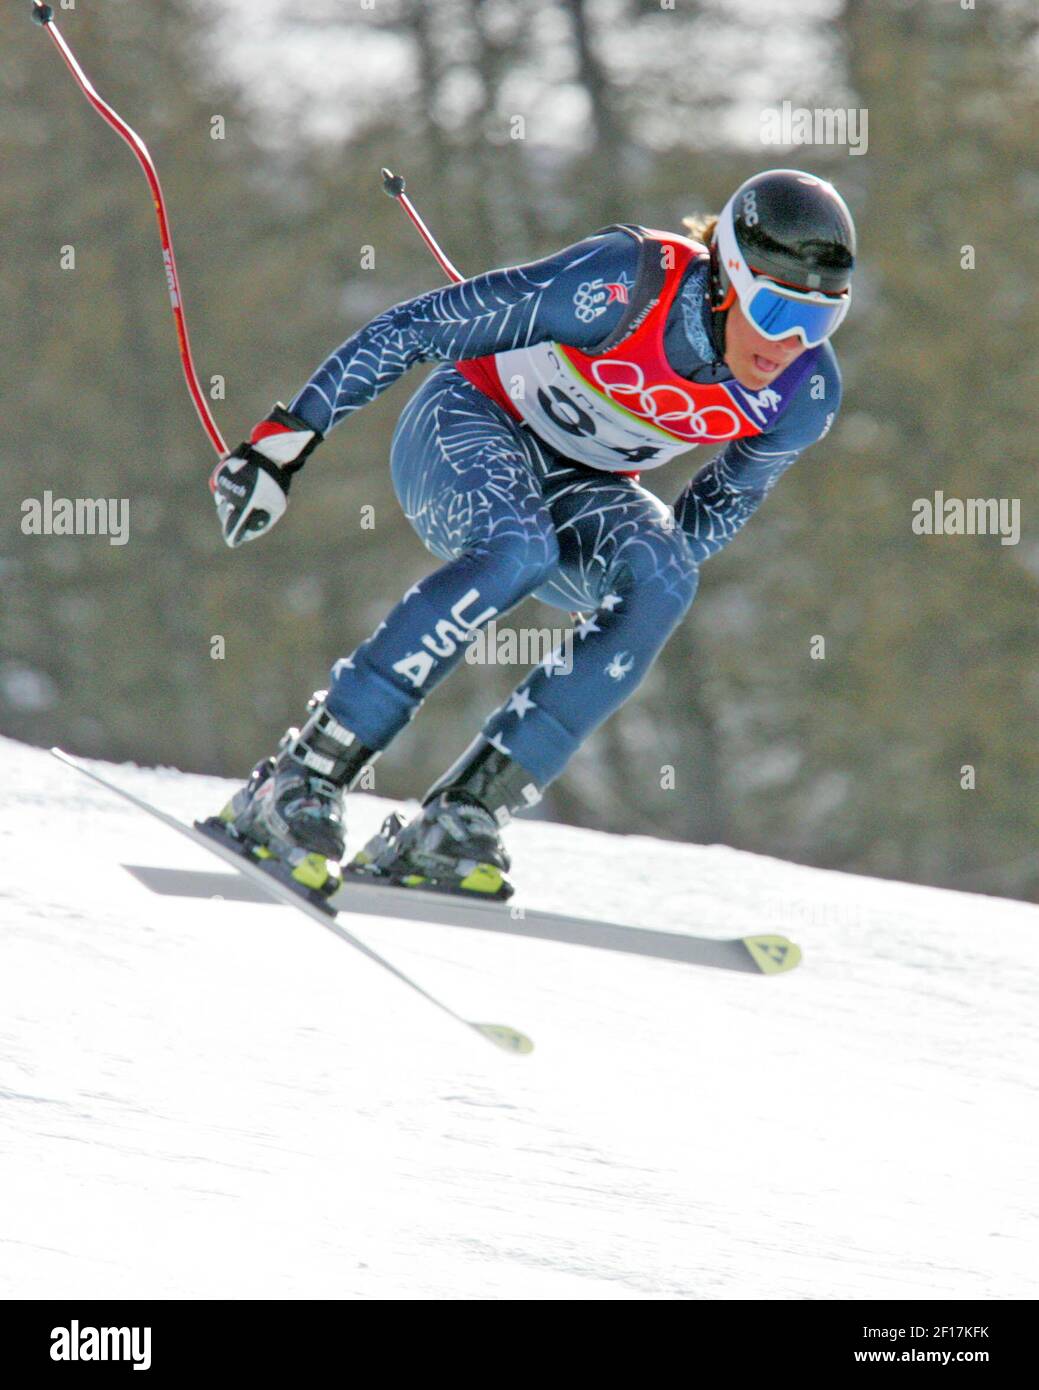 Steven Nyman of the United States catches some air during the men's combined downhill competition at the Turin 2006 Winter Olympic Games in Sestriere Borgata, Italy Tuesday February 14, 2006. (Ron Jenkins./ Fort Worth Star-Telegram/ KRT) Stock Photo